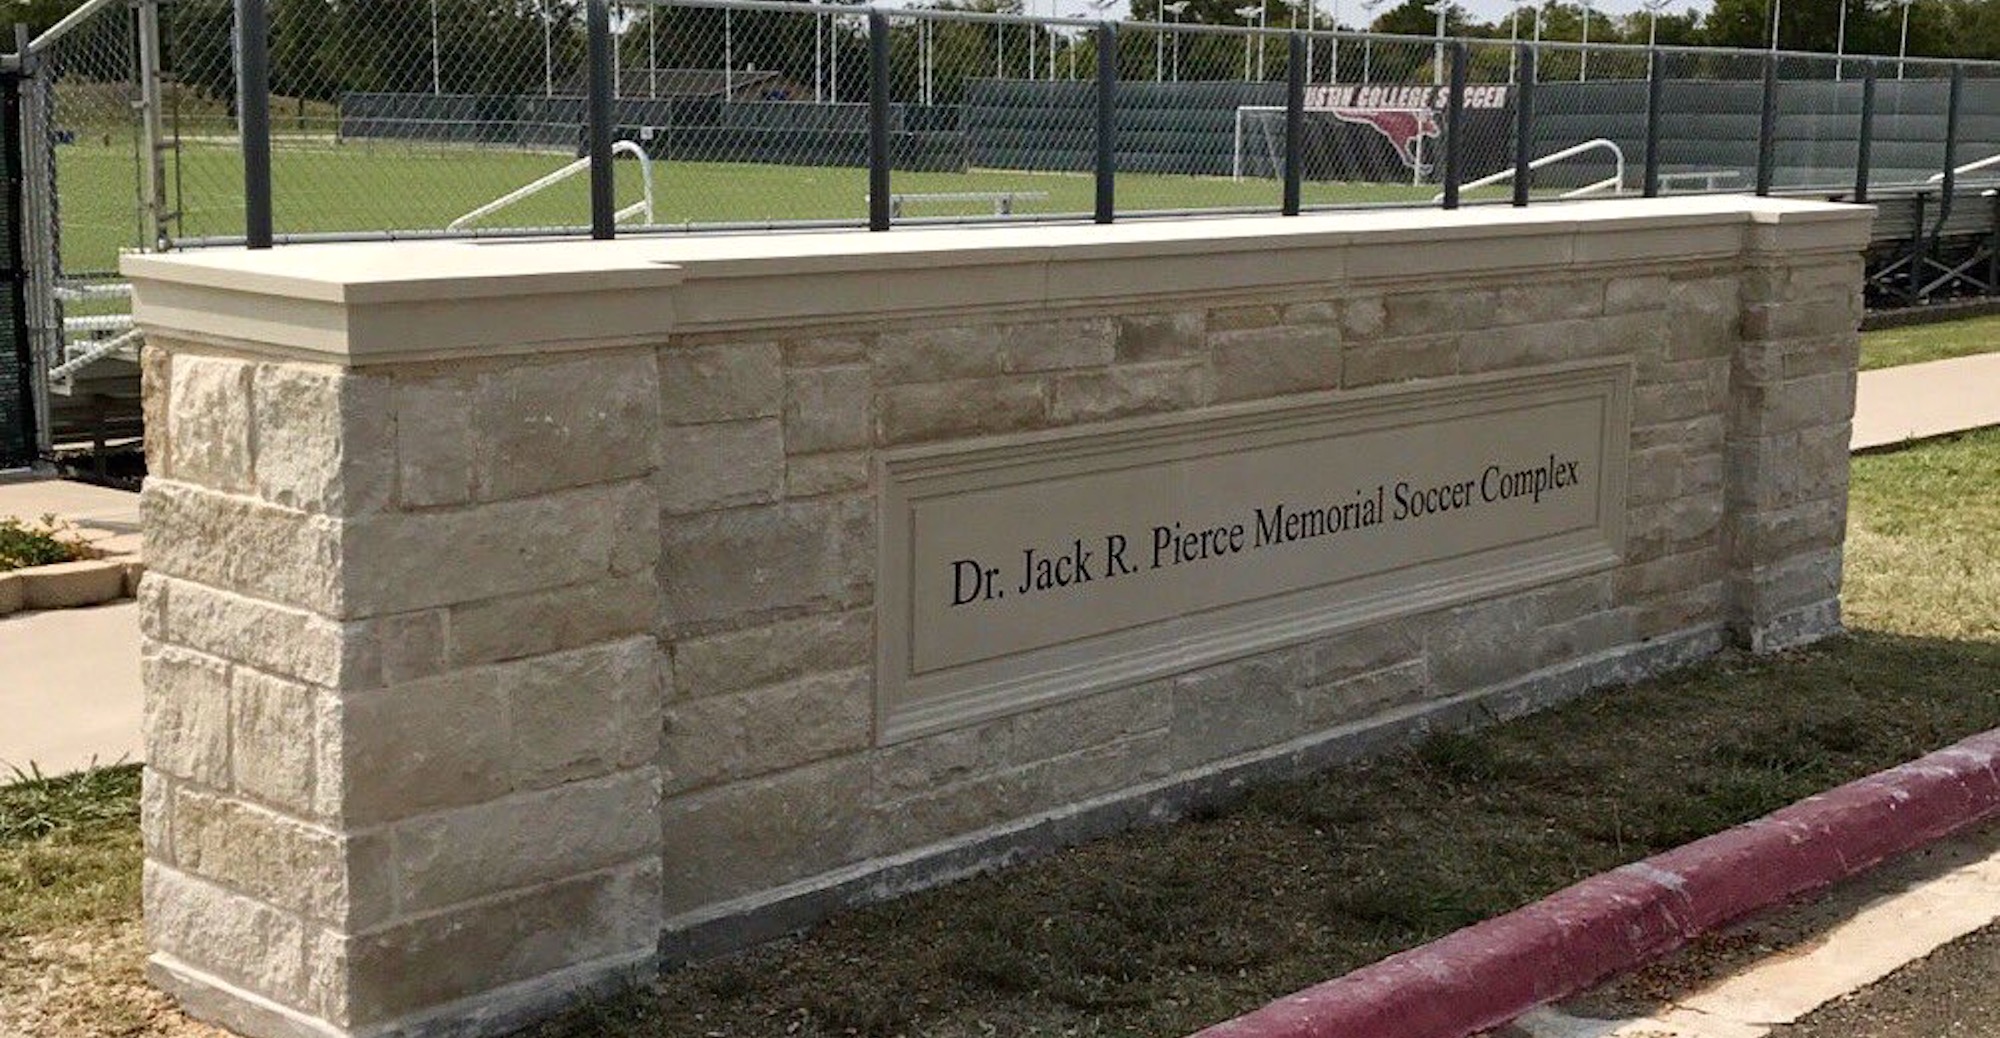 Join Us Friday Night as We Dedicate the Dr. Jack R. Pierce Memorial Soccer Complex